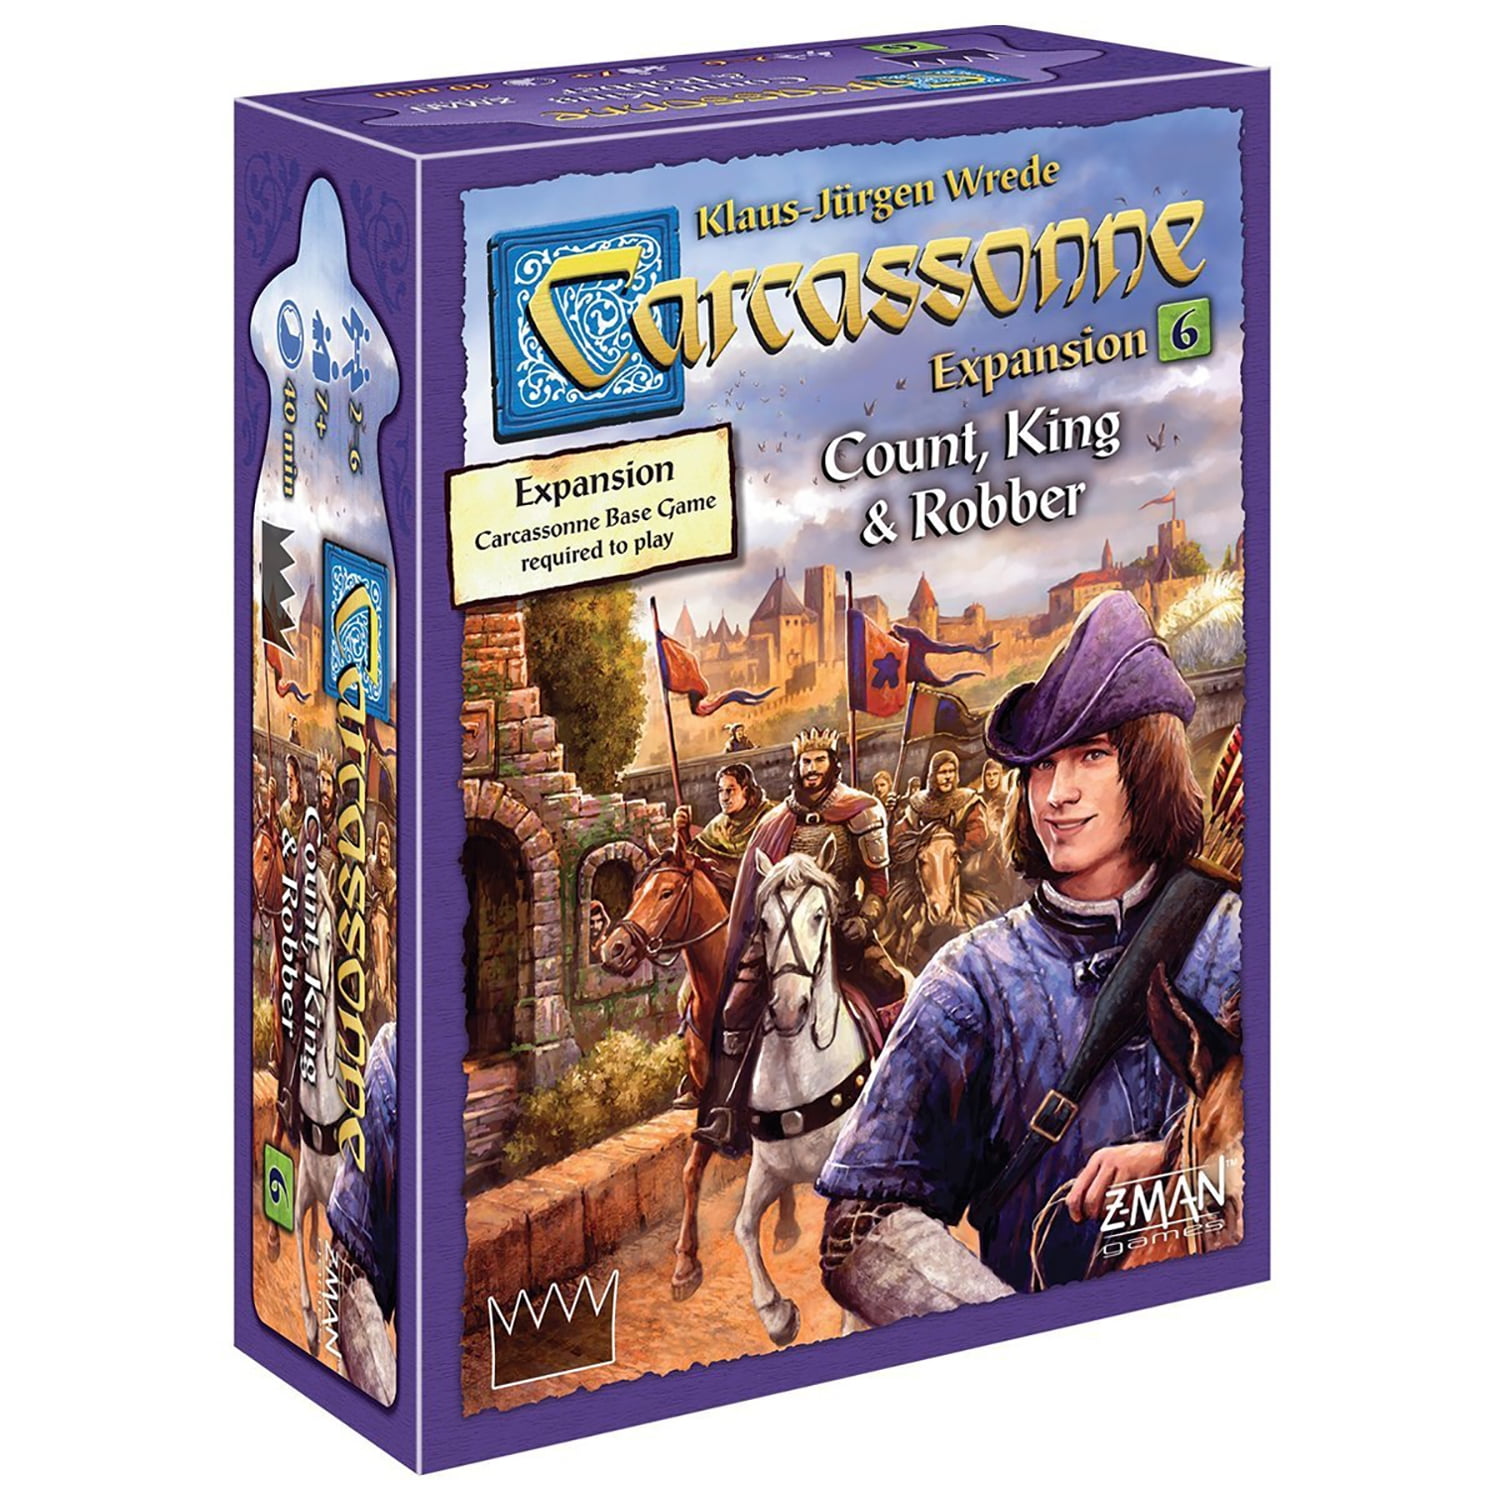 Carcassonne Strategy Board Game Expansion 6: Count, King & Robber